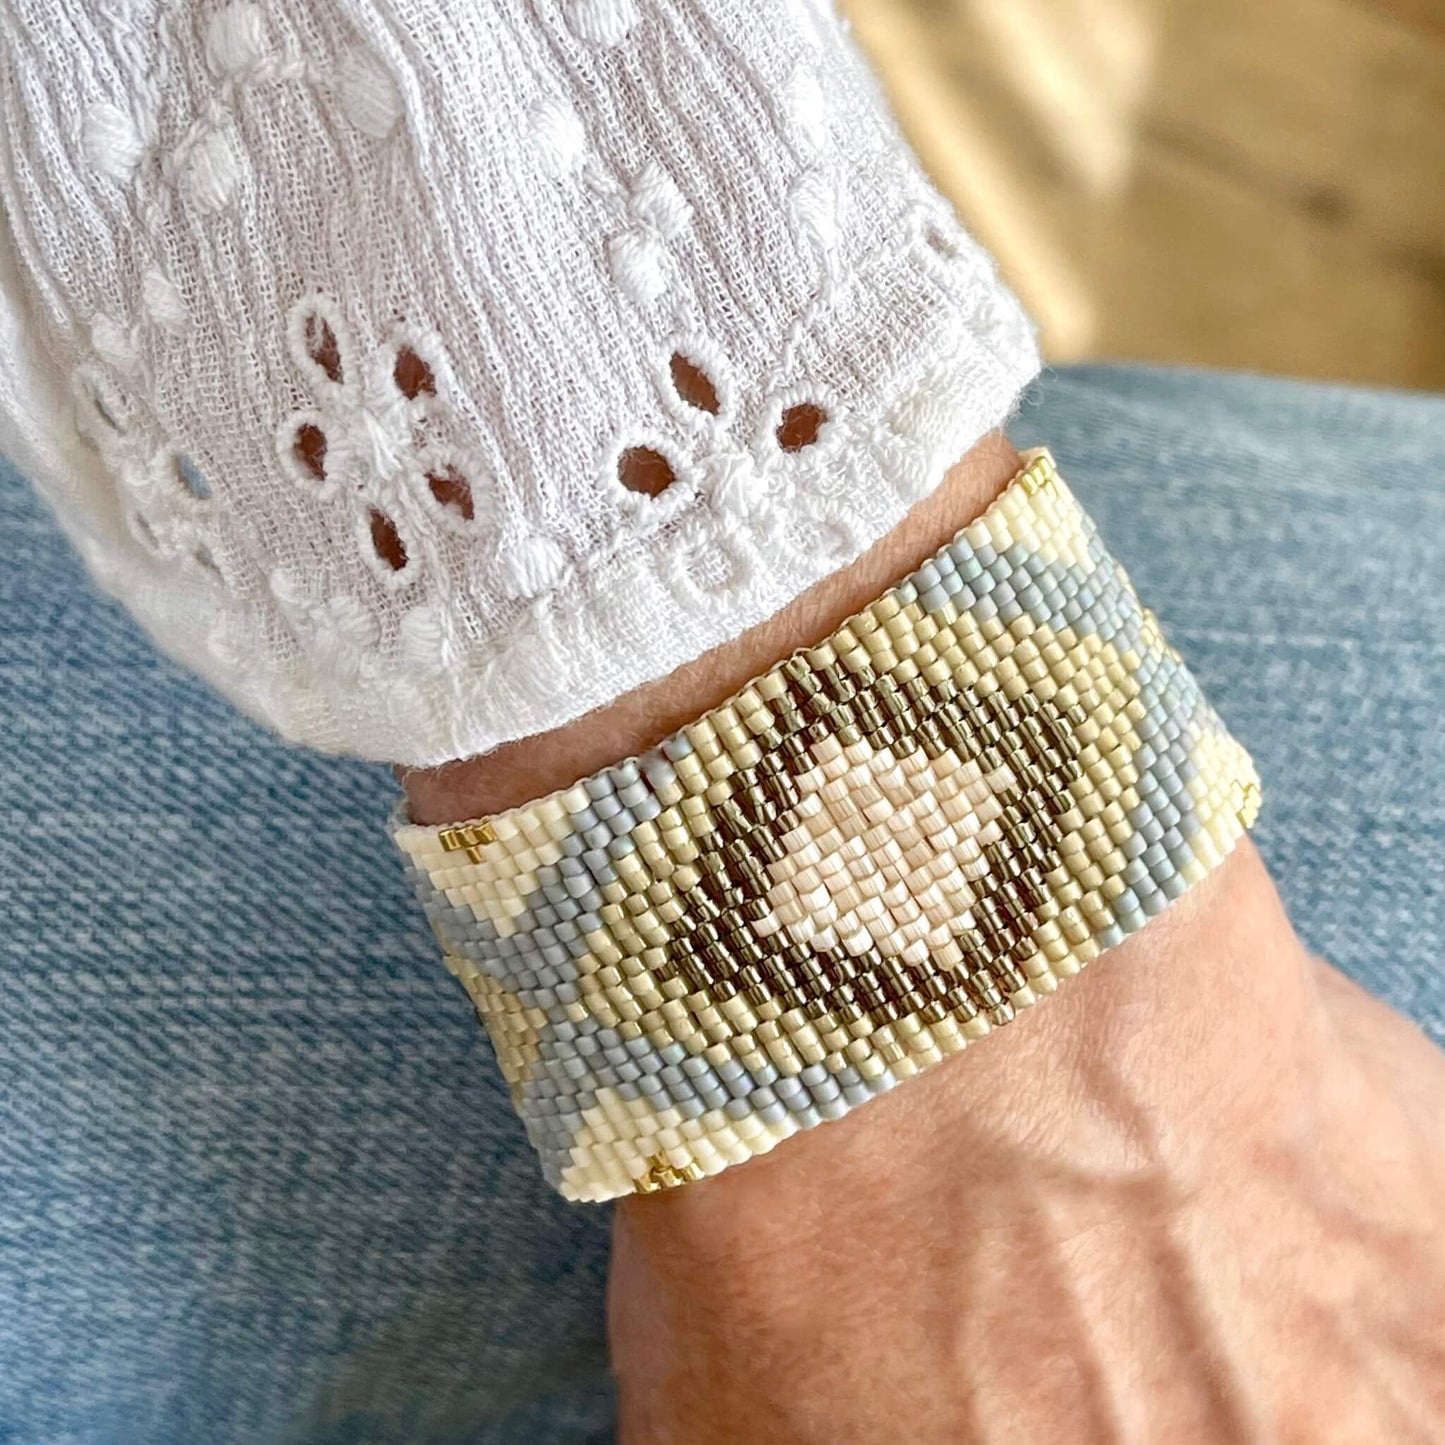 Gold and ivory wide beaded bracelet with seed beads in diamonds and x's patterns.